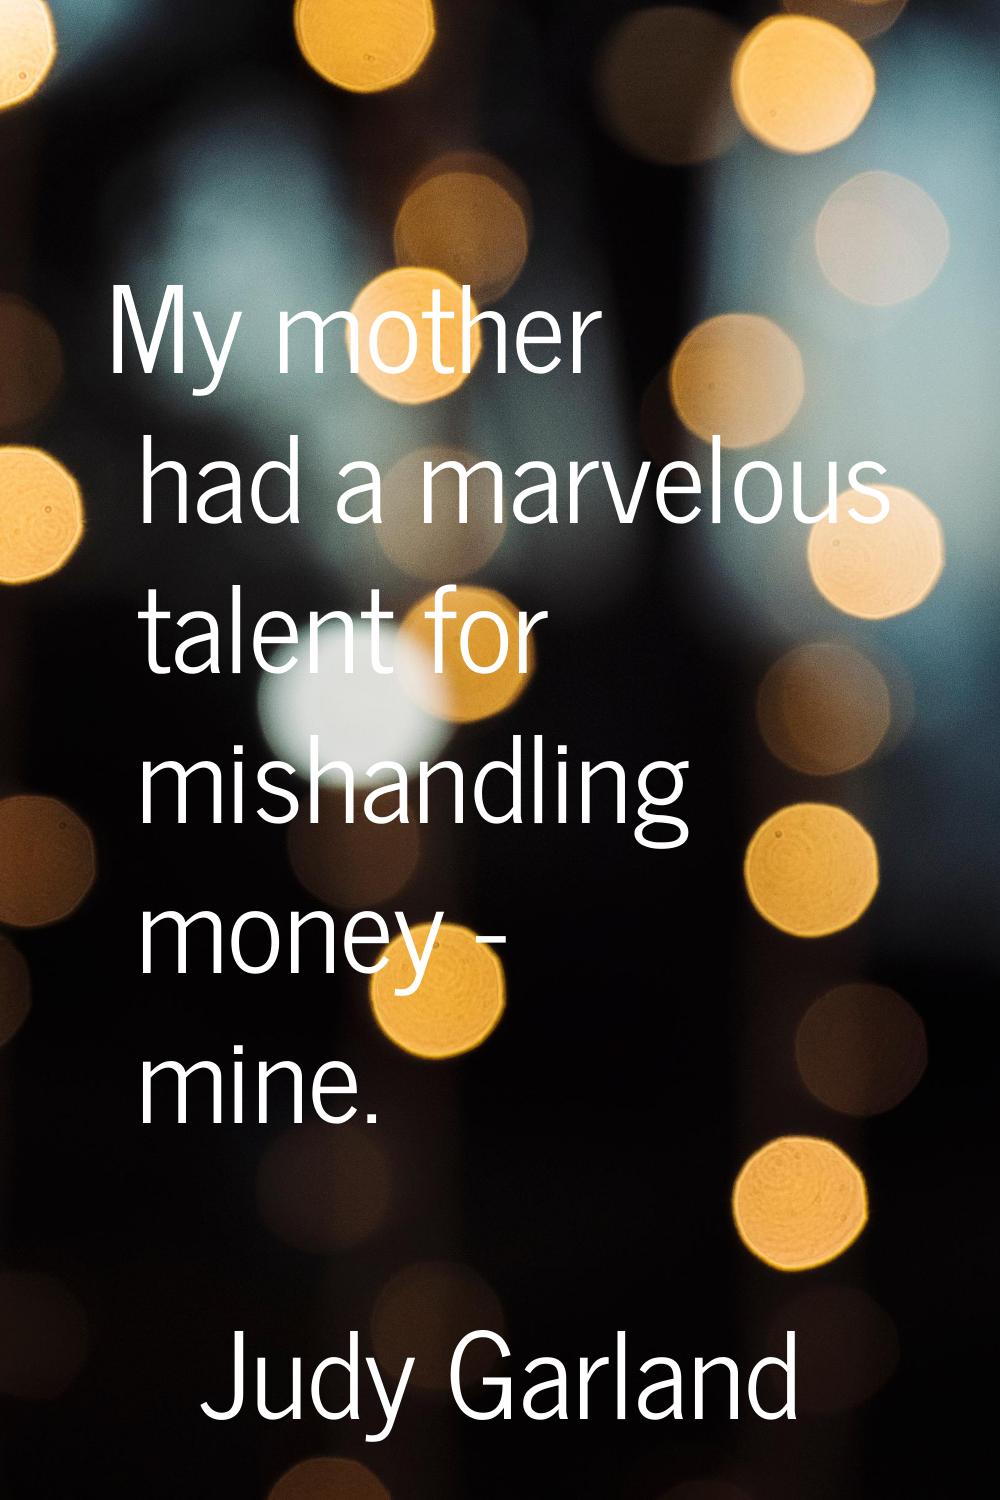 My mother had a marvelous talent for mishandling money - mine.